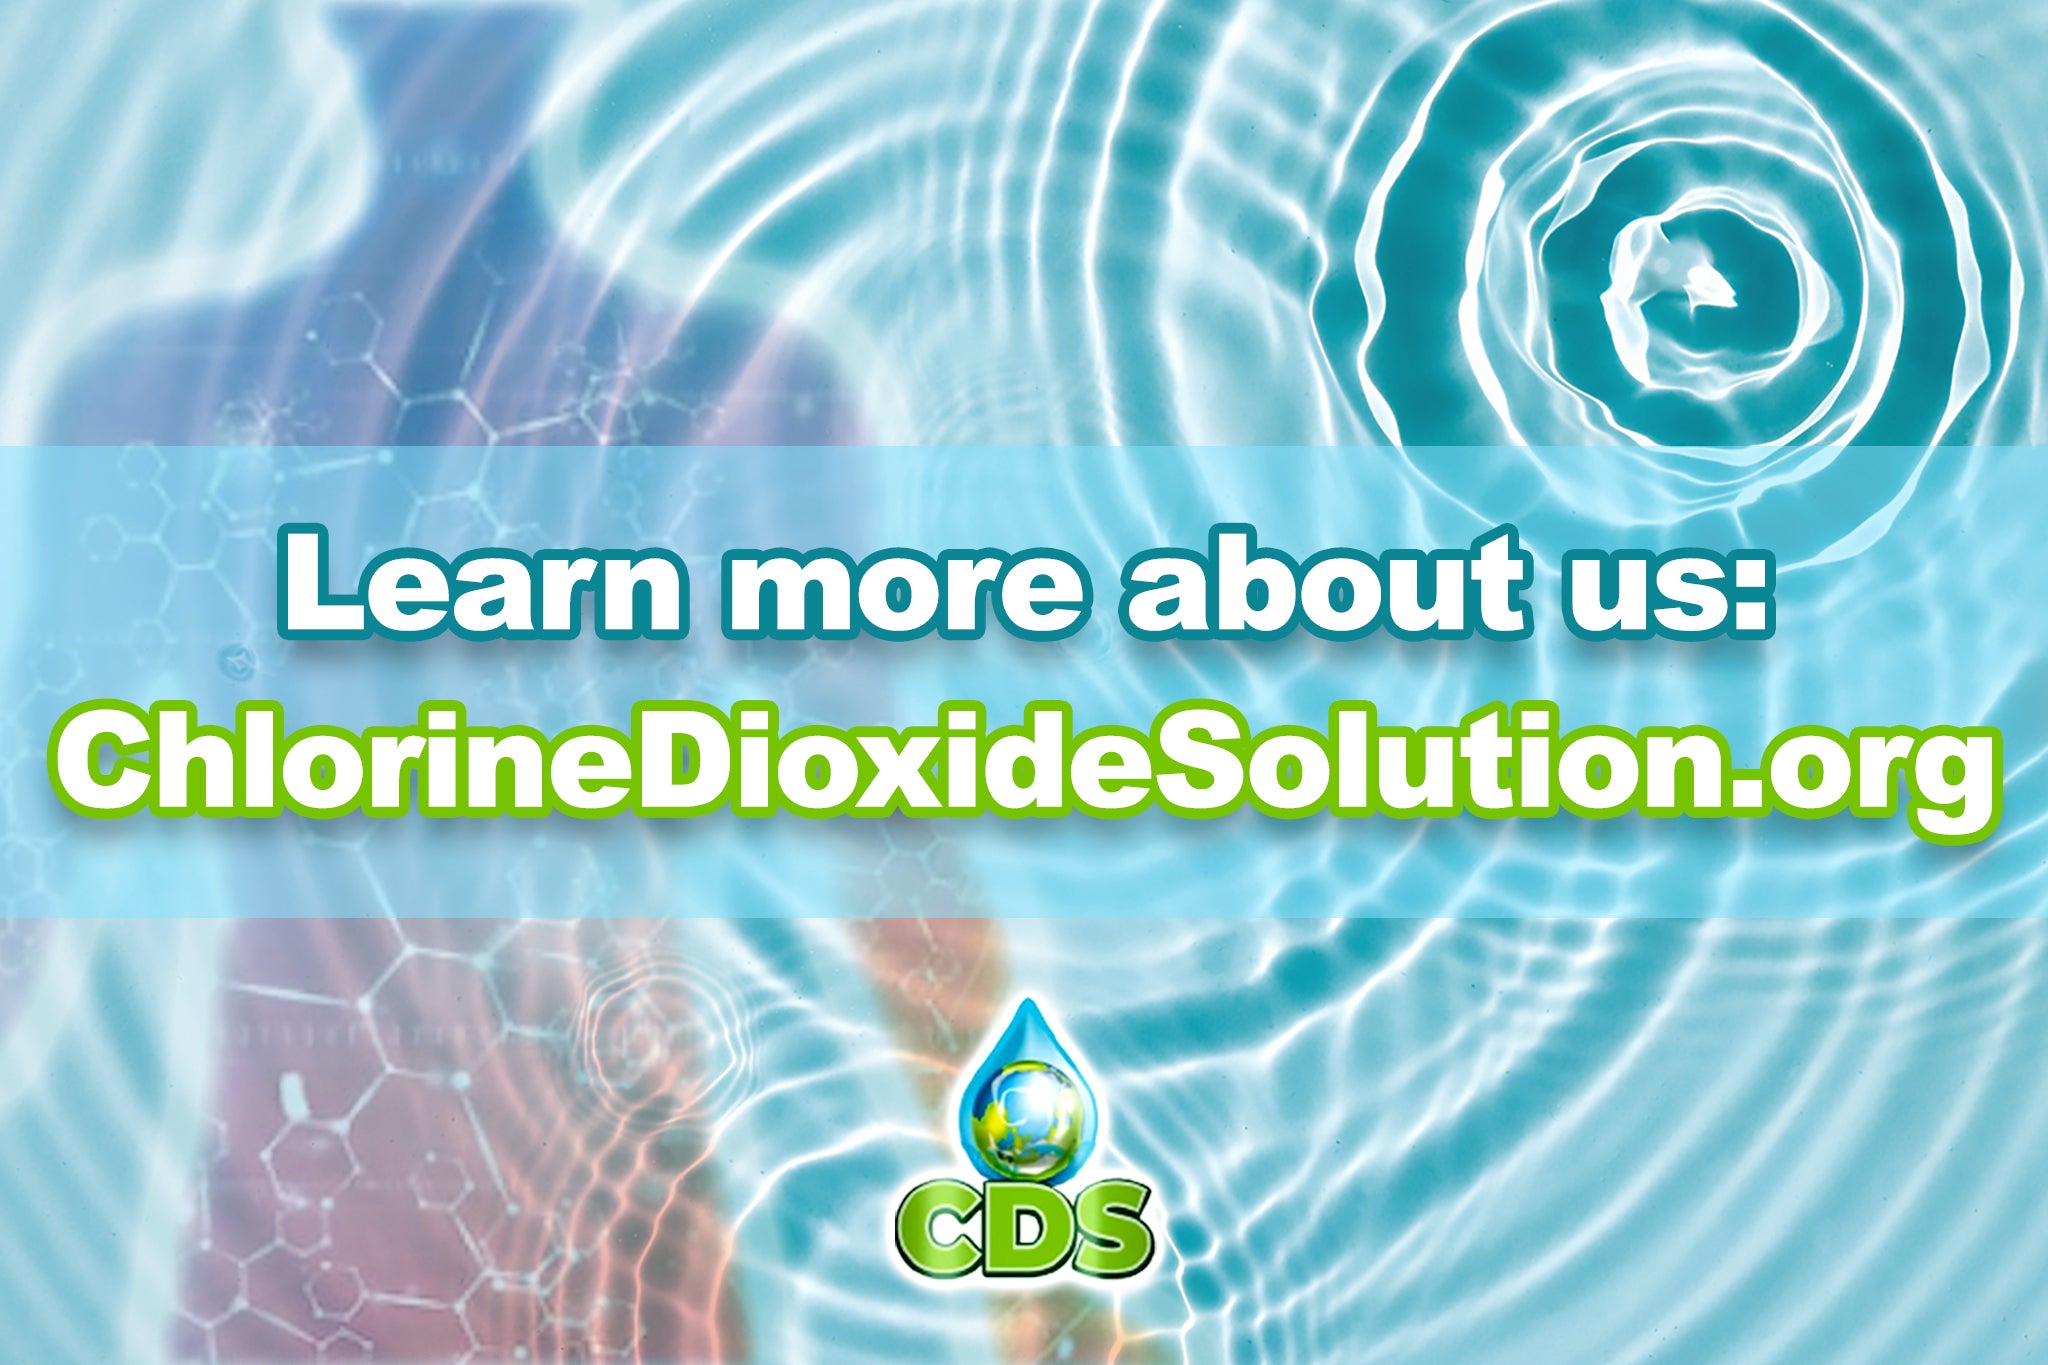 Chlorine Dioxide Solution - About Us